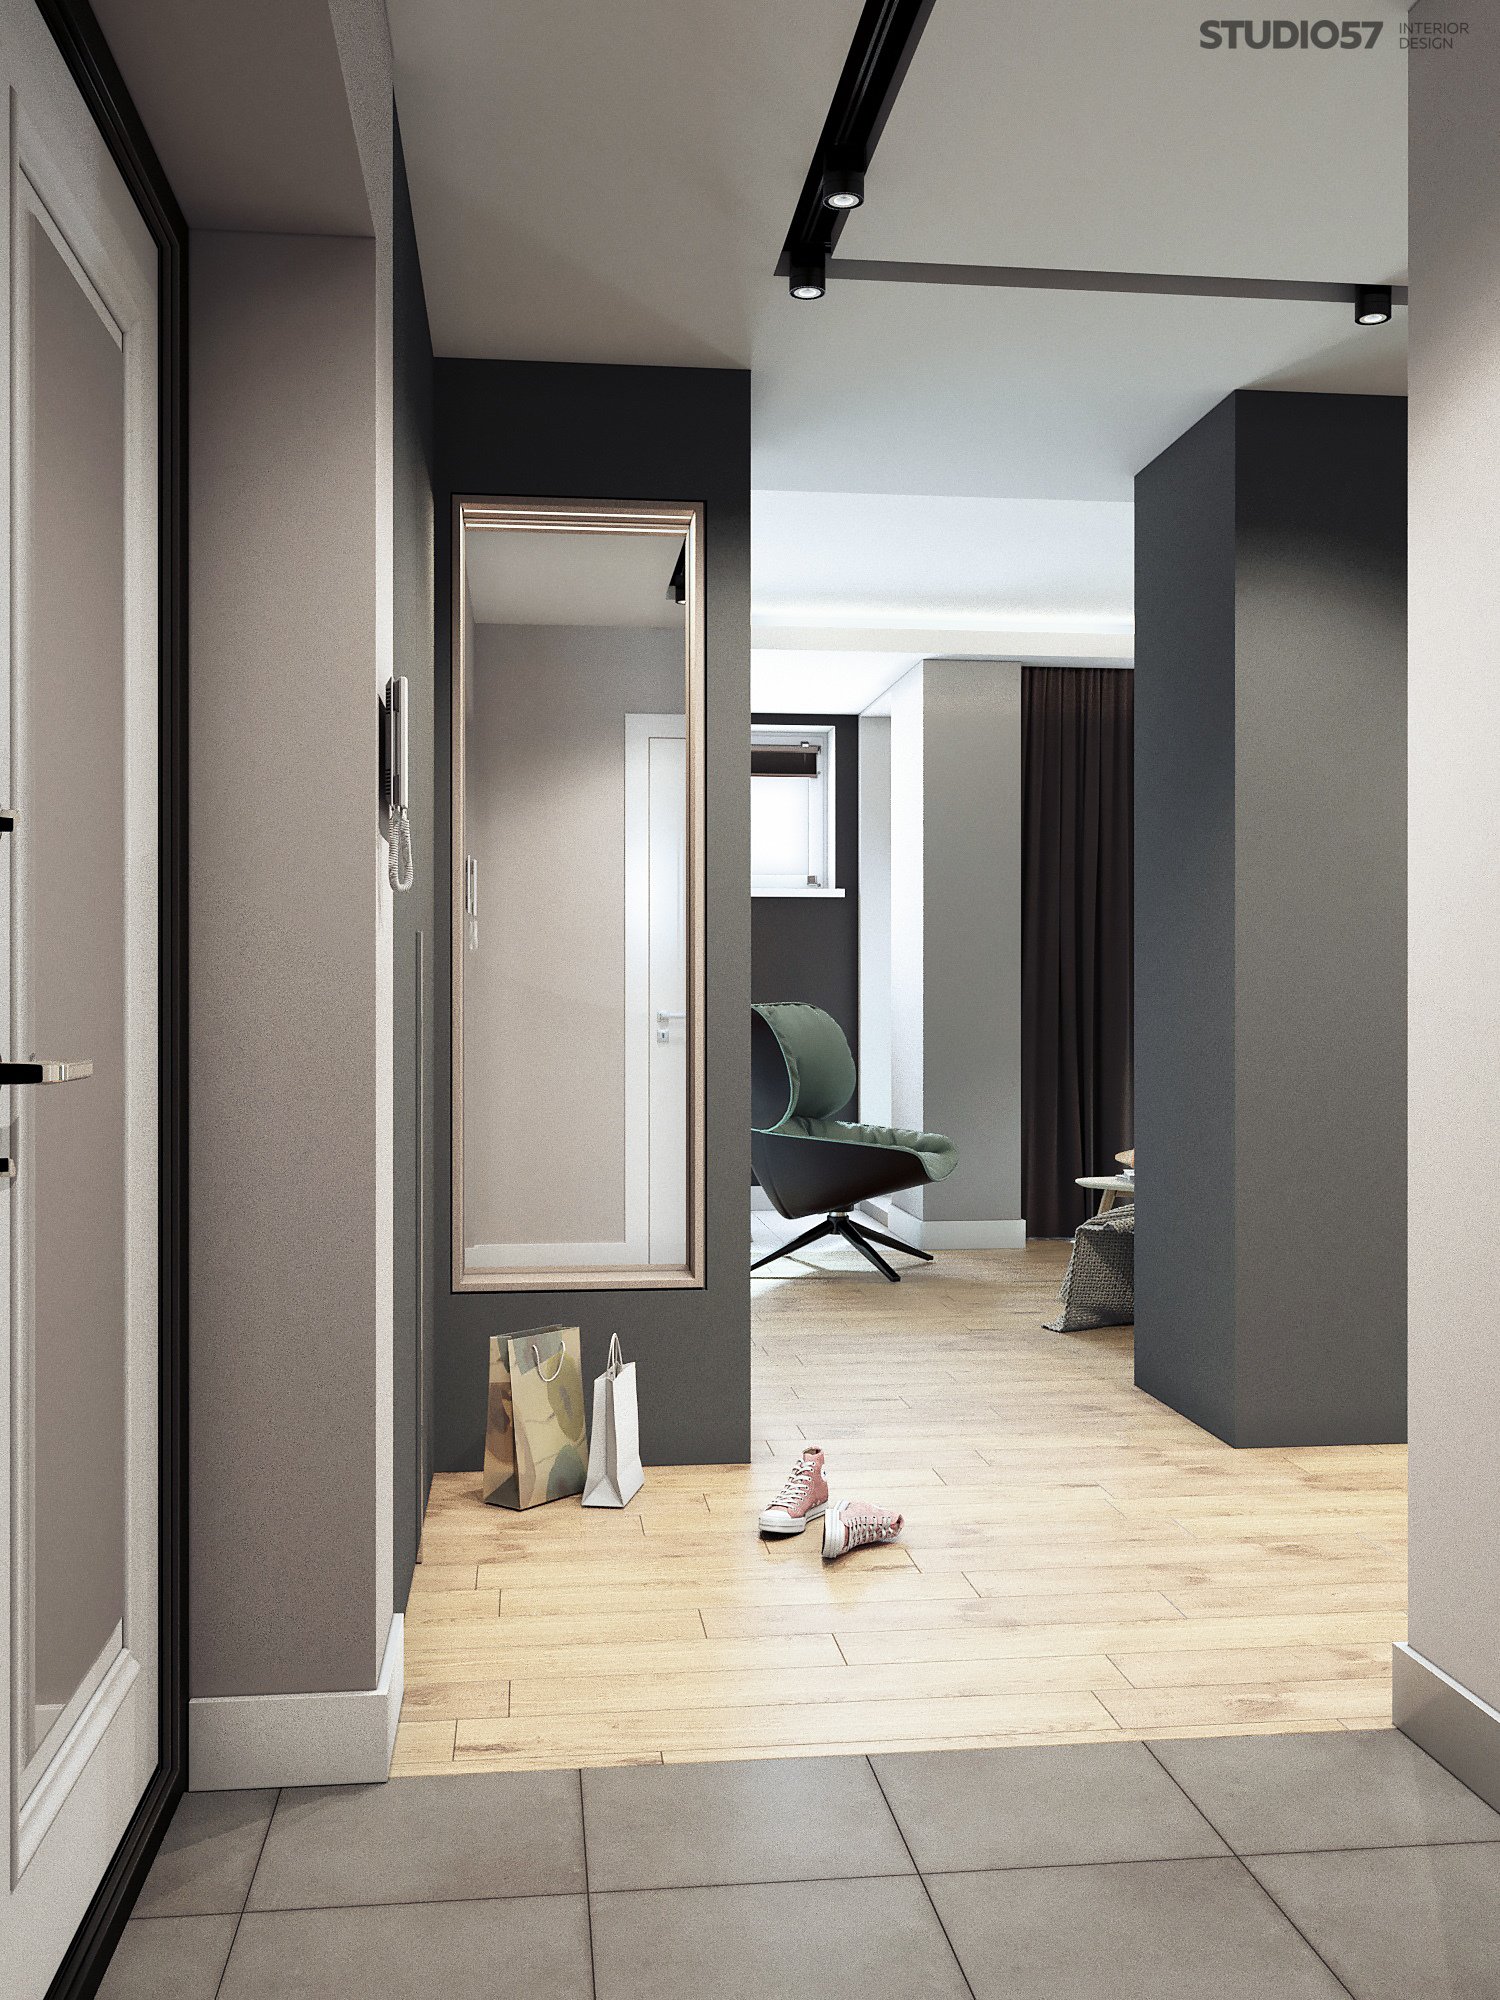 Photo of the hallway interior in gray shades